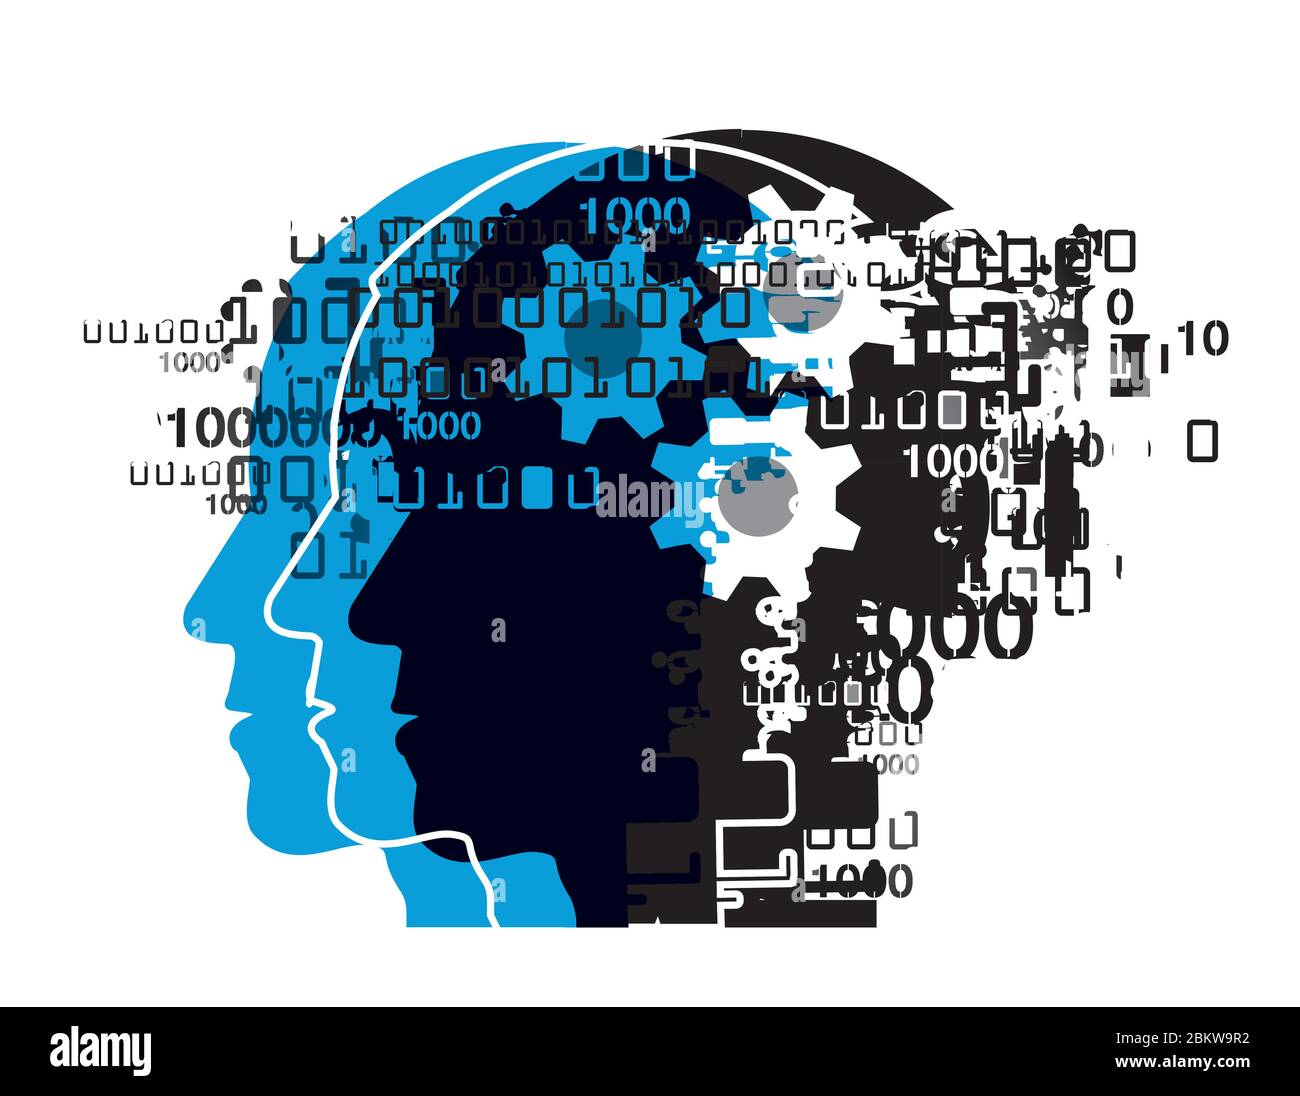 Programmer, computer expert, hacker silhouettes. Illustration of three stylized male heads with binary codes and gear. Vector available. Stock Vector